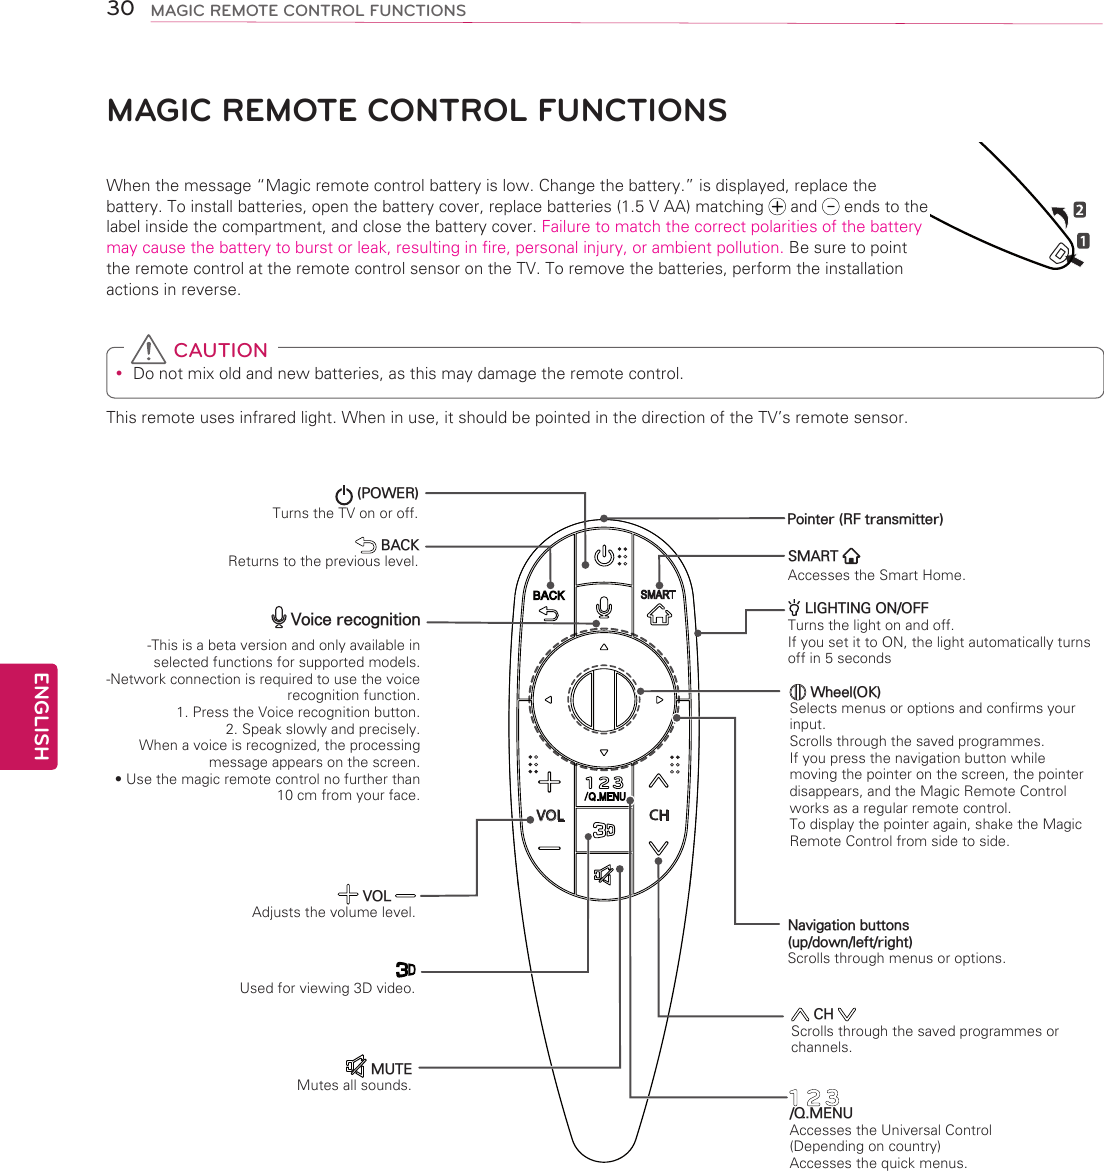 ENGLISH30 MAGIC REMOTE CONTROL FUNCTIONSMAGIC REMOTE CONTROL FUNCTIONSWhen the message “Magic remote control battery is low. Change the battery.” is displayed, replace the battery. To install batteries, open the battery cover, replace batteries (1.5 V AA) matching   and   ends to the label inside the compartment, and close the battery cover. Failure to match the correct polarities of the battery may cause the battery to burst or leak, resulting in fire, personal injury, or ambient pollution. Be sure to point the remote control at the remote control sensor on the TV. To remove the batteries, perform the installation actions in reverse. yDo not mix old and new batteries, as this may damage the remote control. CAUTIONThis remote uses infrared light. When in use, it should be pointed in the direction of the TV’s remote sensor.VOL CH /Q.MENUAccesses the Universal Control (Depending on country)Accesses the quick menus. Wheel(OK)Selects menus or options and confirms your input. Scrolls through the saved programmes. If you press the navigation button while moving the pointer on the screen, the pointer disappears, and the Magic Remote Control works as a regular remote control. To display the pointer again, shake the Magic Remote Control from side to side. (POWER) Turns the TV on or off.Used for viewing 3D video. BACK Returns to the previous level. CH Scrolls through the saved programmes or channels.Navigation buttons (up/down/left/right) Scrolls through menus or options. MUTEMutes all sounds. VOL Adjusts the volume level. Voice recognition-This is a beta version and only available in selected functions for supported models. -Network connection is required to use the voice recognition function.1. Press the Voice recognition button.2. Speak slowly and precisely.  When a voice is recognized, the processing message appears on the screen.• Use the magic remote control no further than 10 cm from your face.SMART   Accesses the Smart Home.Pointer (RF transmitter) LIGHTING ON/OFFTurns the light on and off.If you set it to ON, the light automatically turns off in 5 seconds